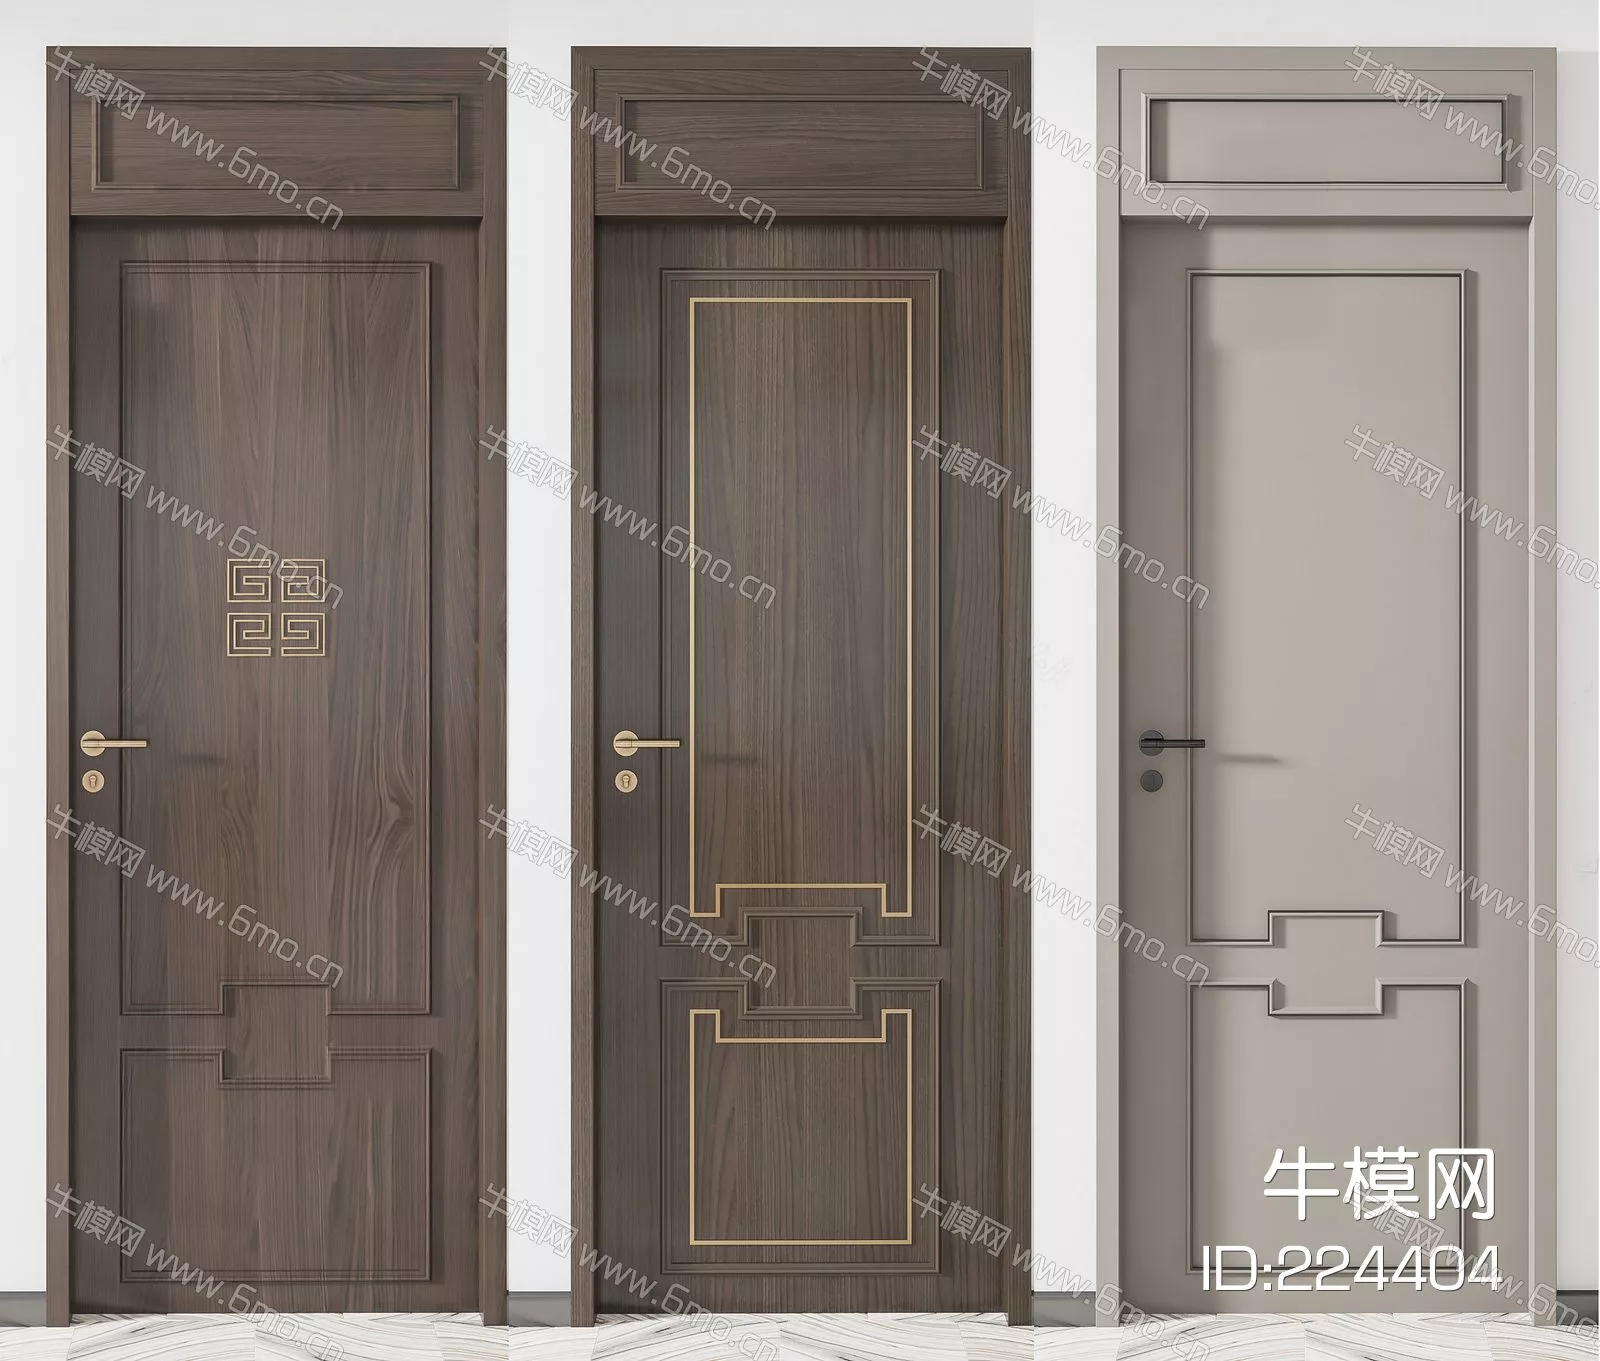 CHINESE DOOR AND WINDOWS - SKETCHUP 3D MODEL - ENSCAPE - 224404